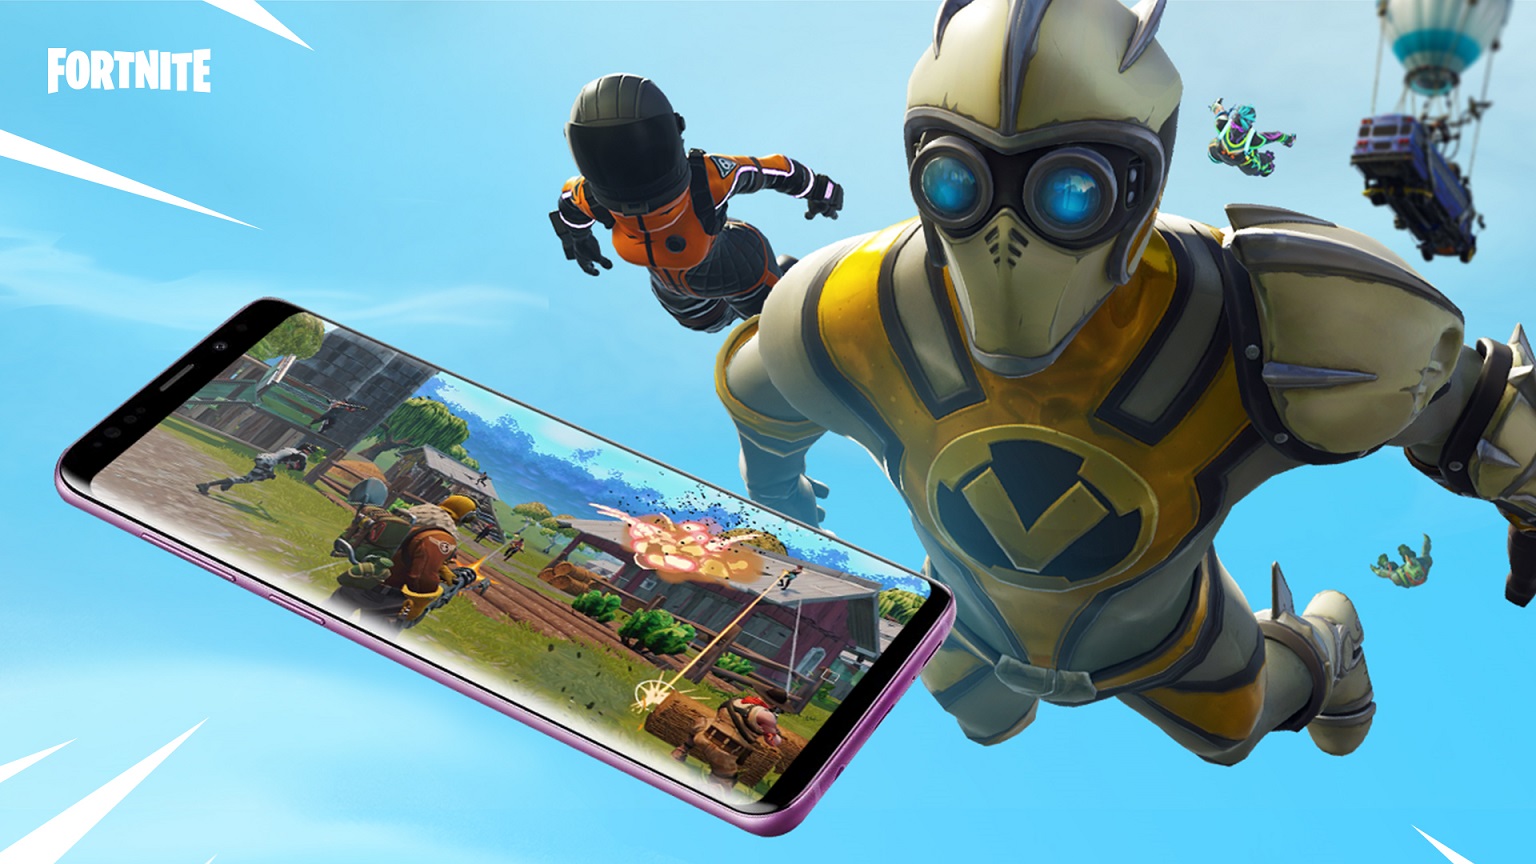 Fortnite Is Now Available On Samsung Galaxy Phones - fortnite is now available on samsung galaxy phones